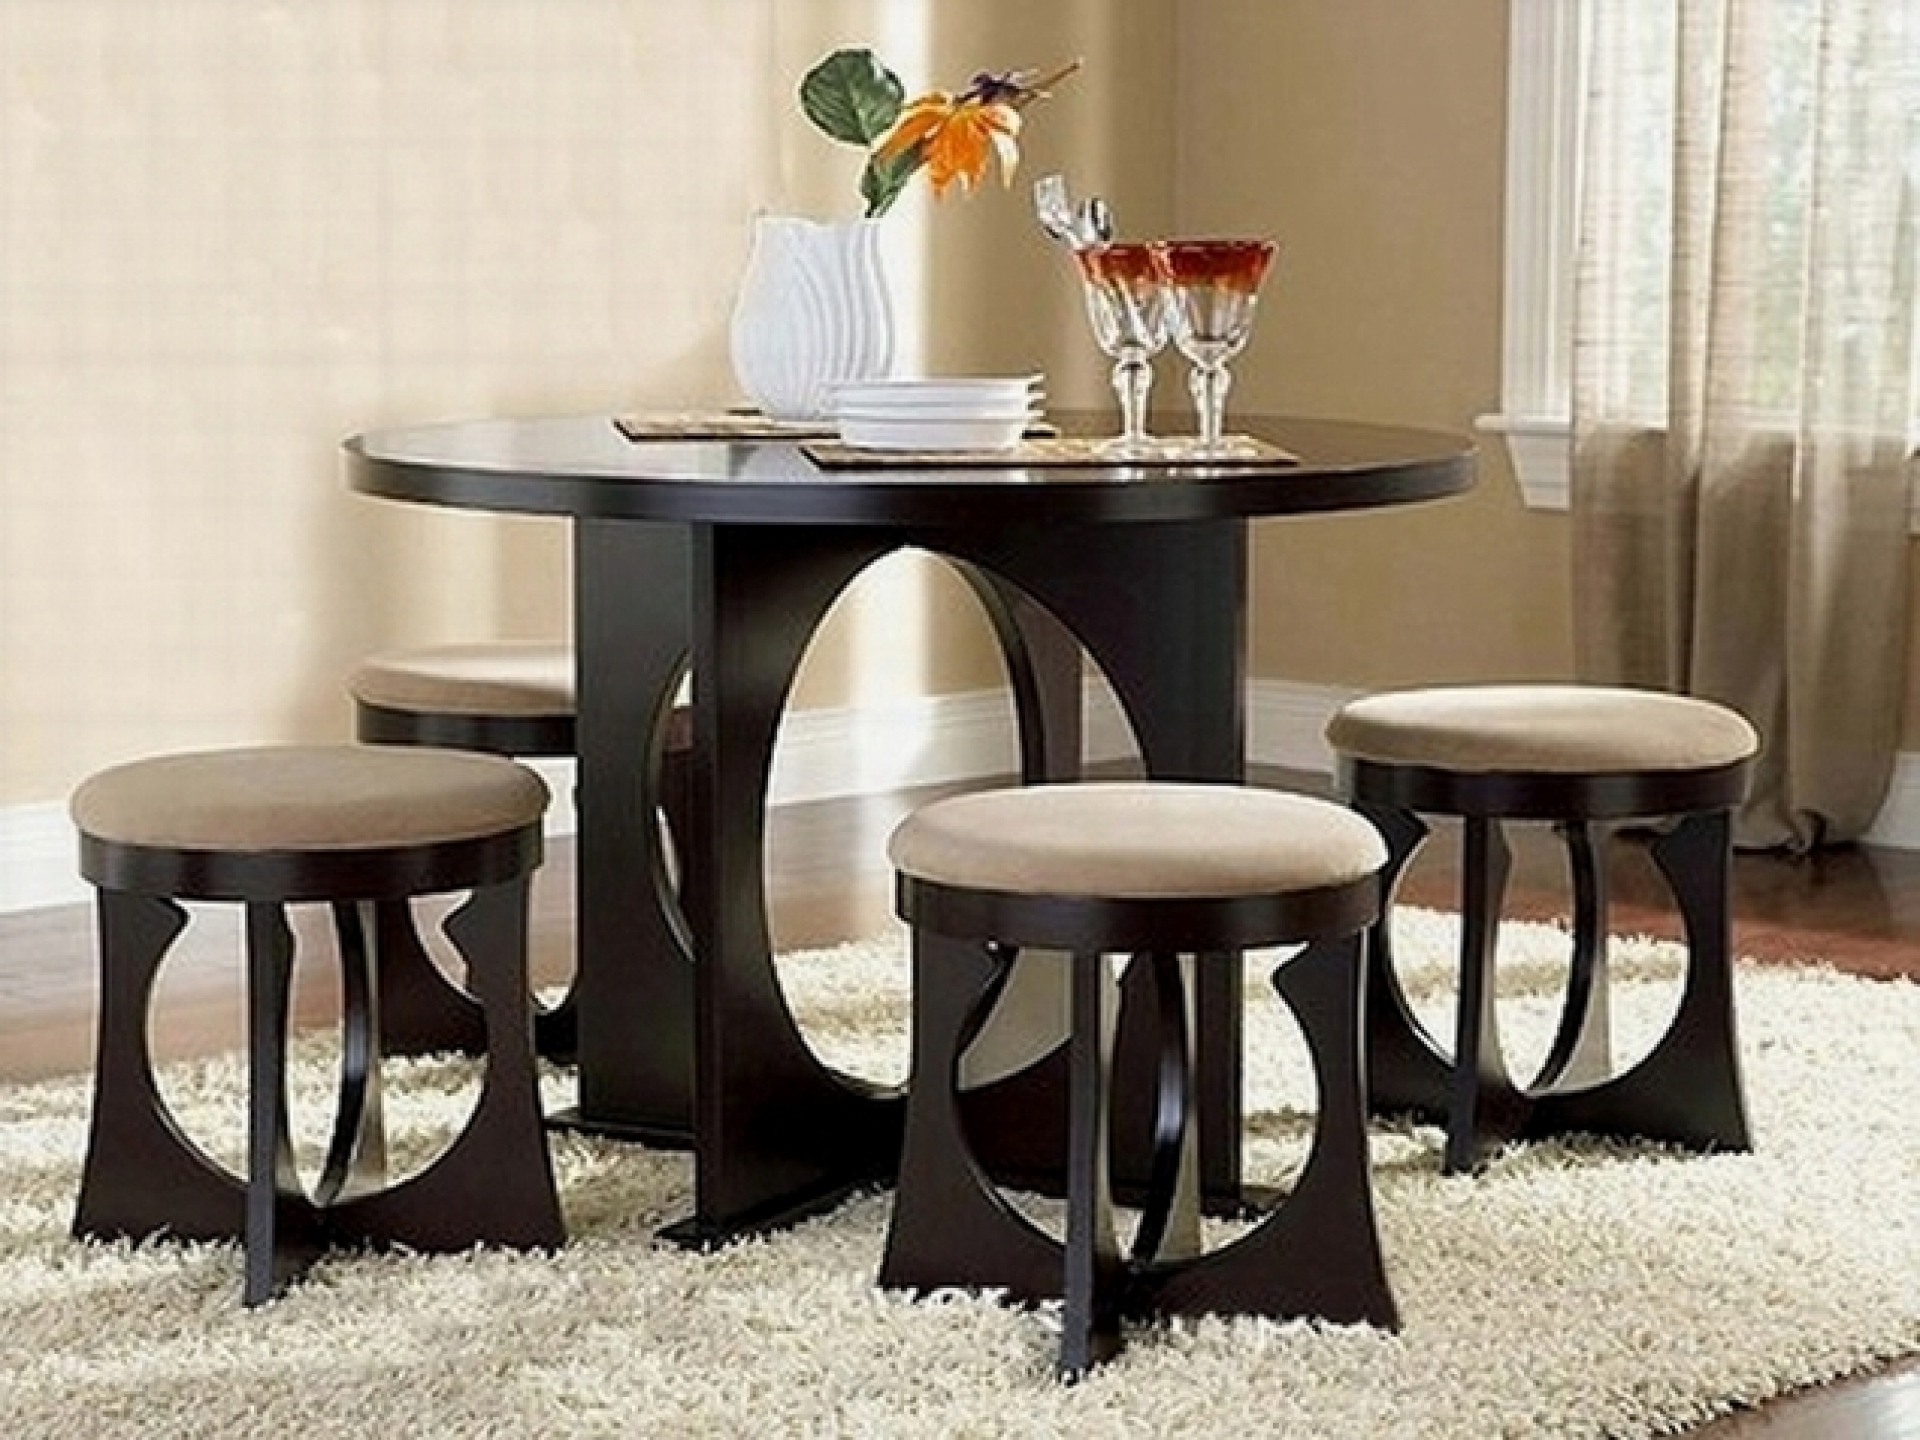 Dining Table And Chairs For Small Rooms Compact Dining Table With Chairs  Small Black Dining Table And Chairs